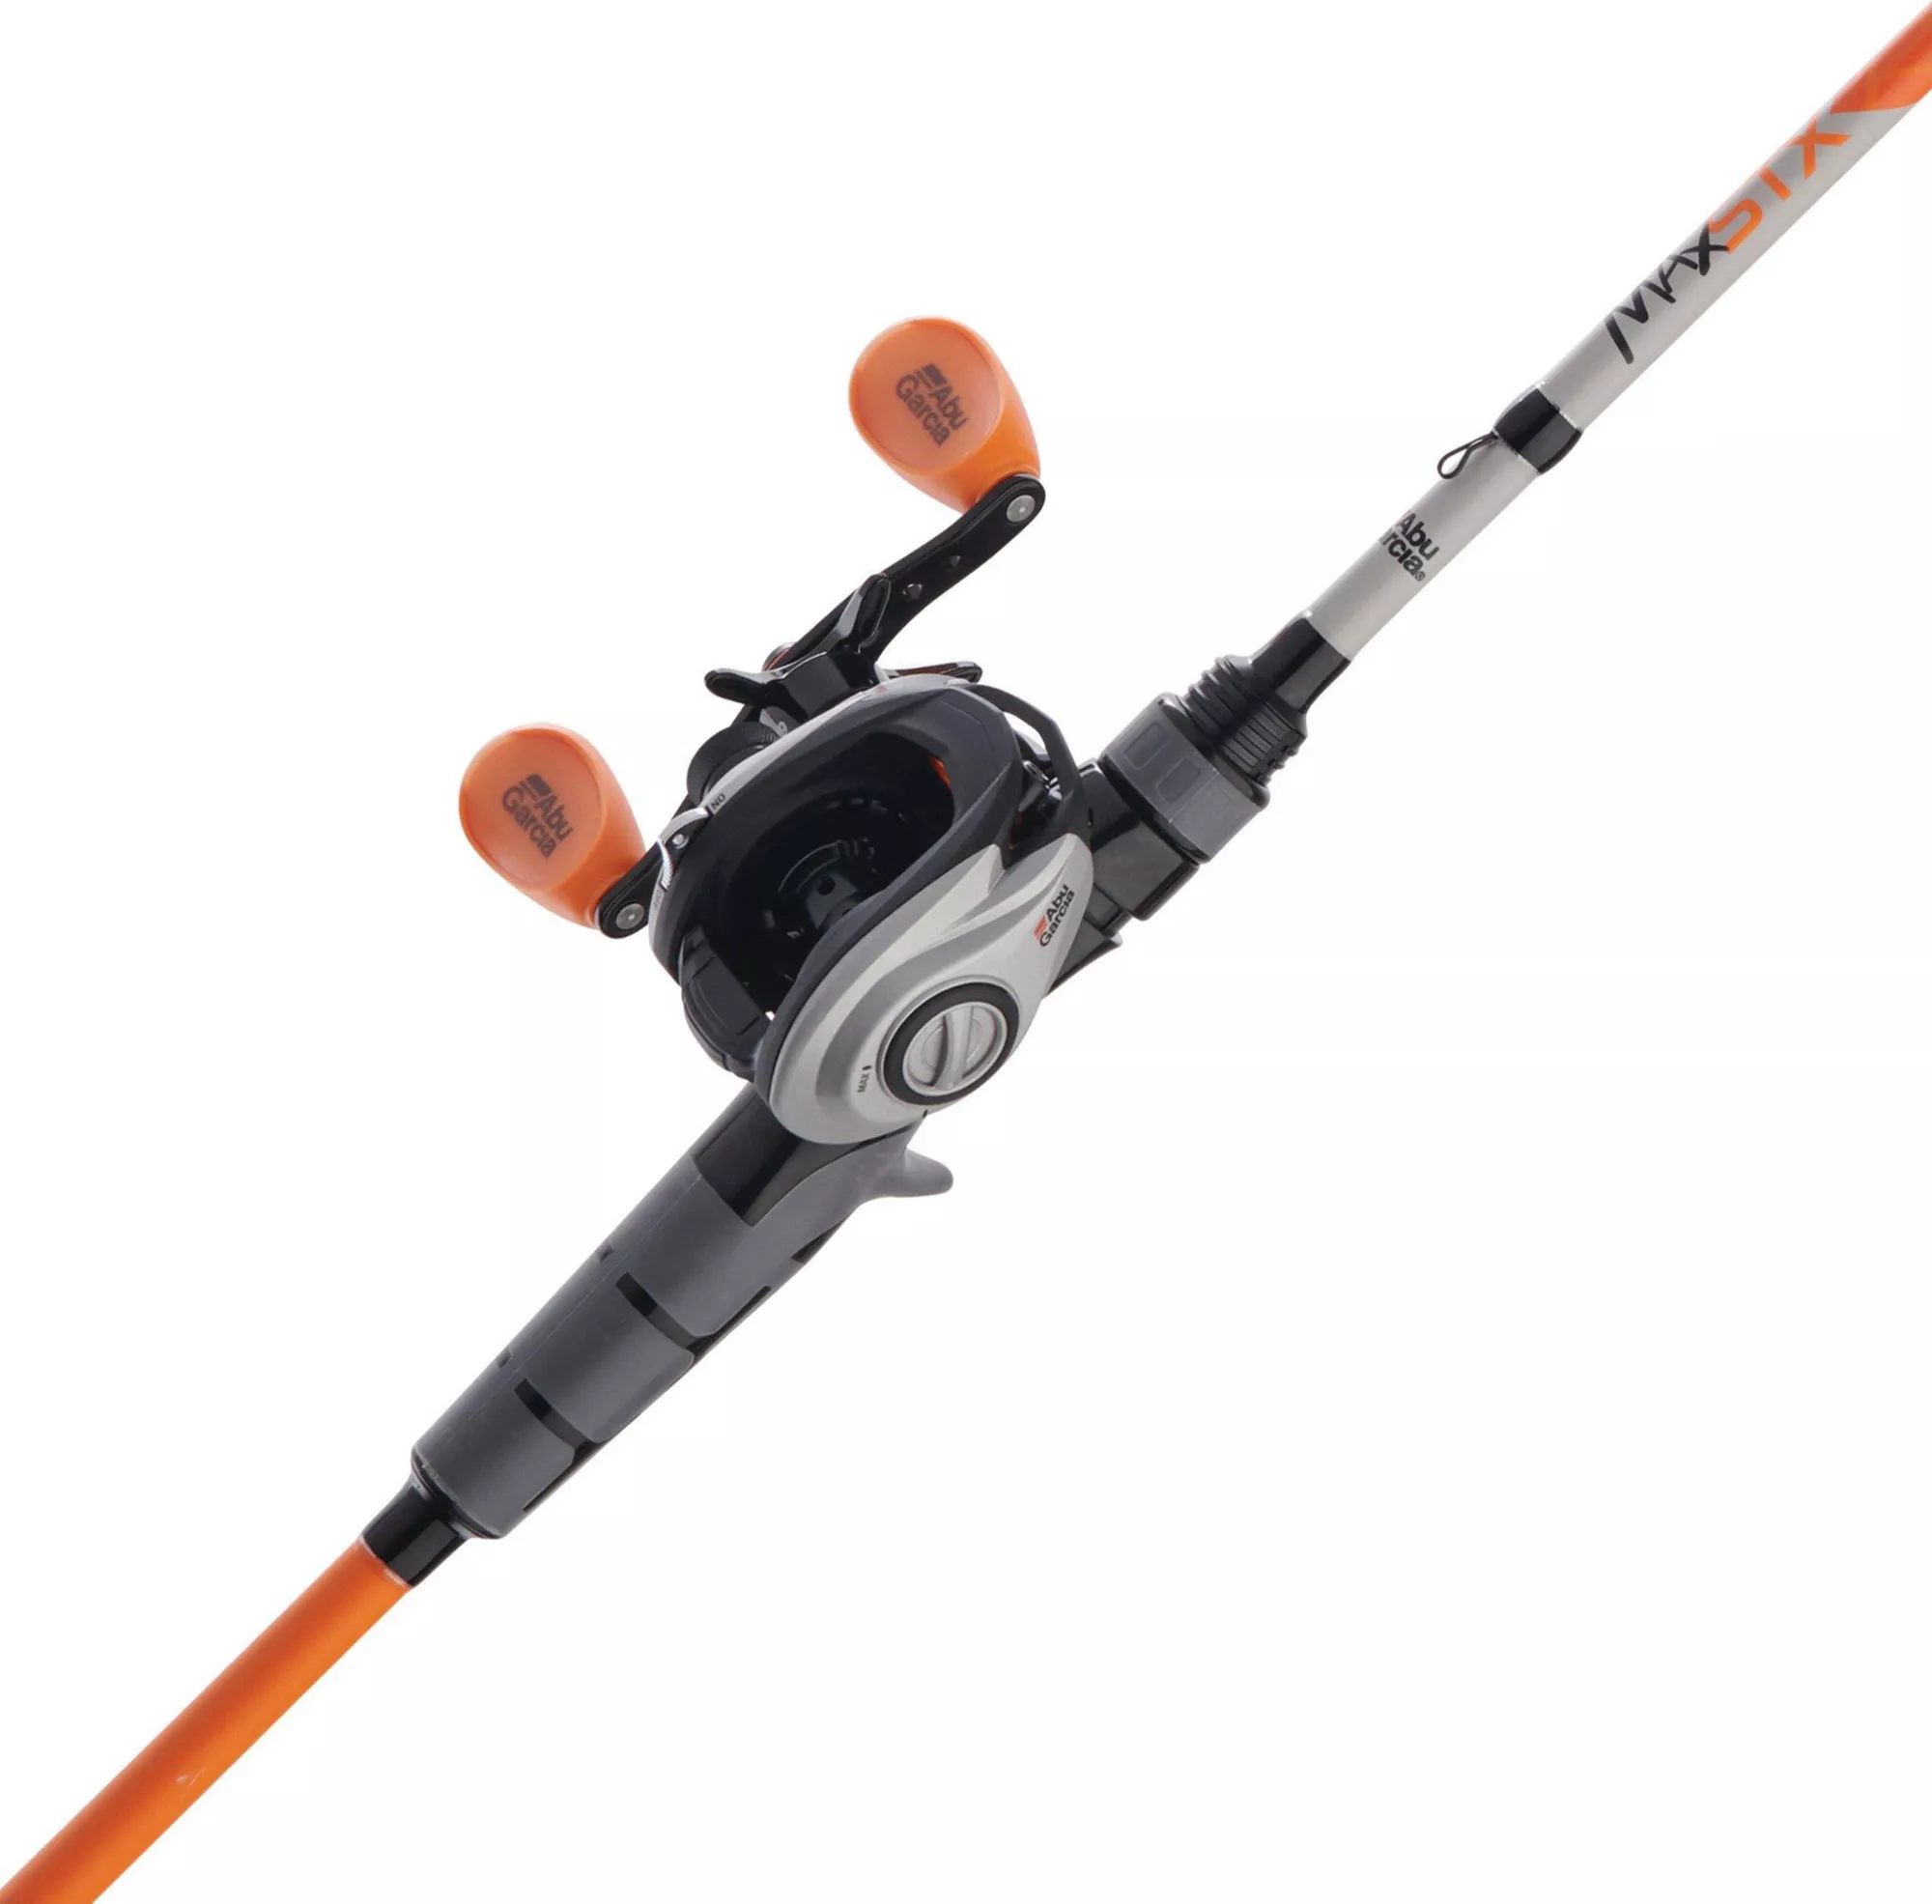 Angler-Approved: Your Complete Guide to Fishing Rods